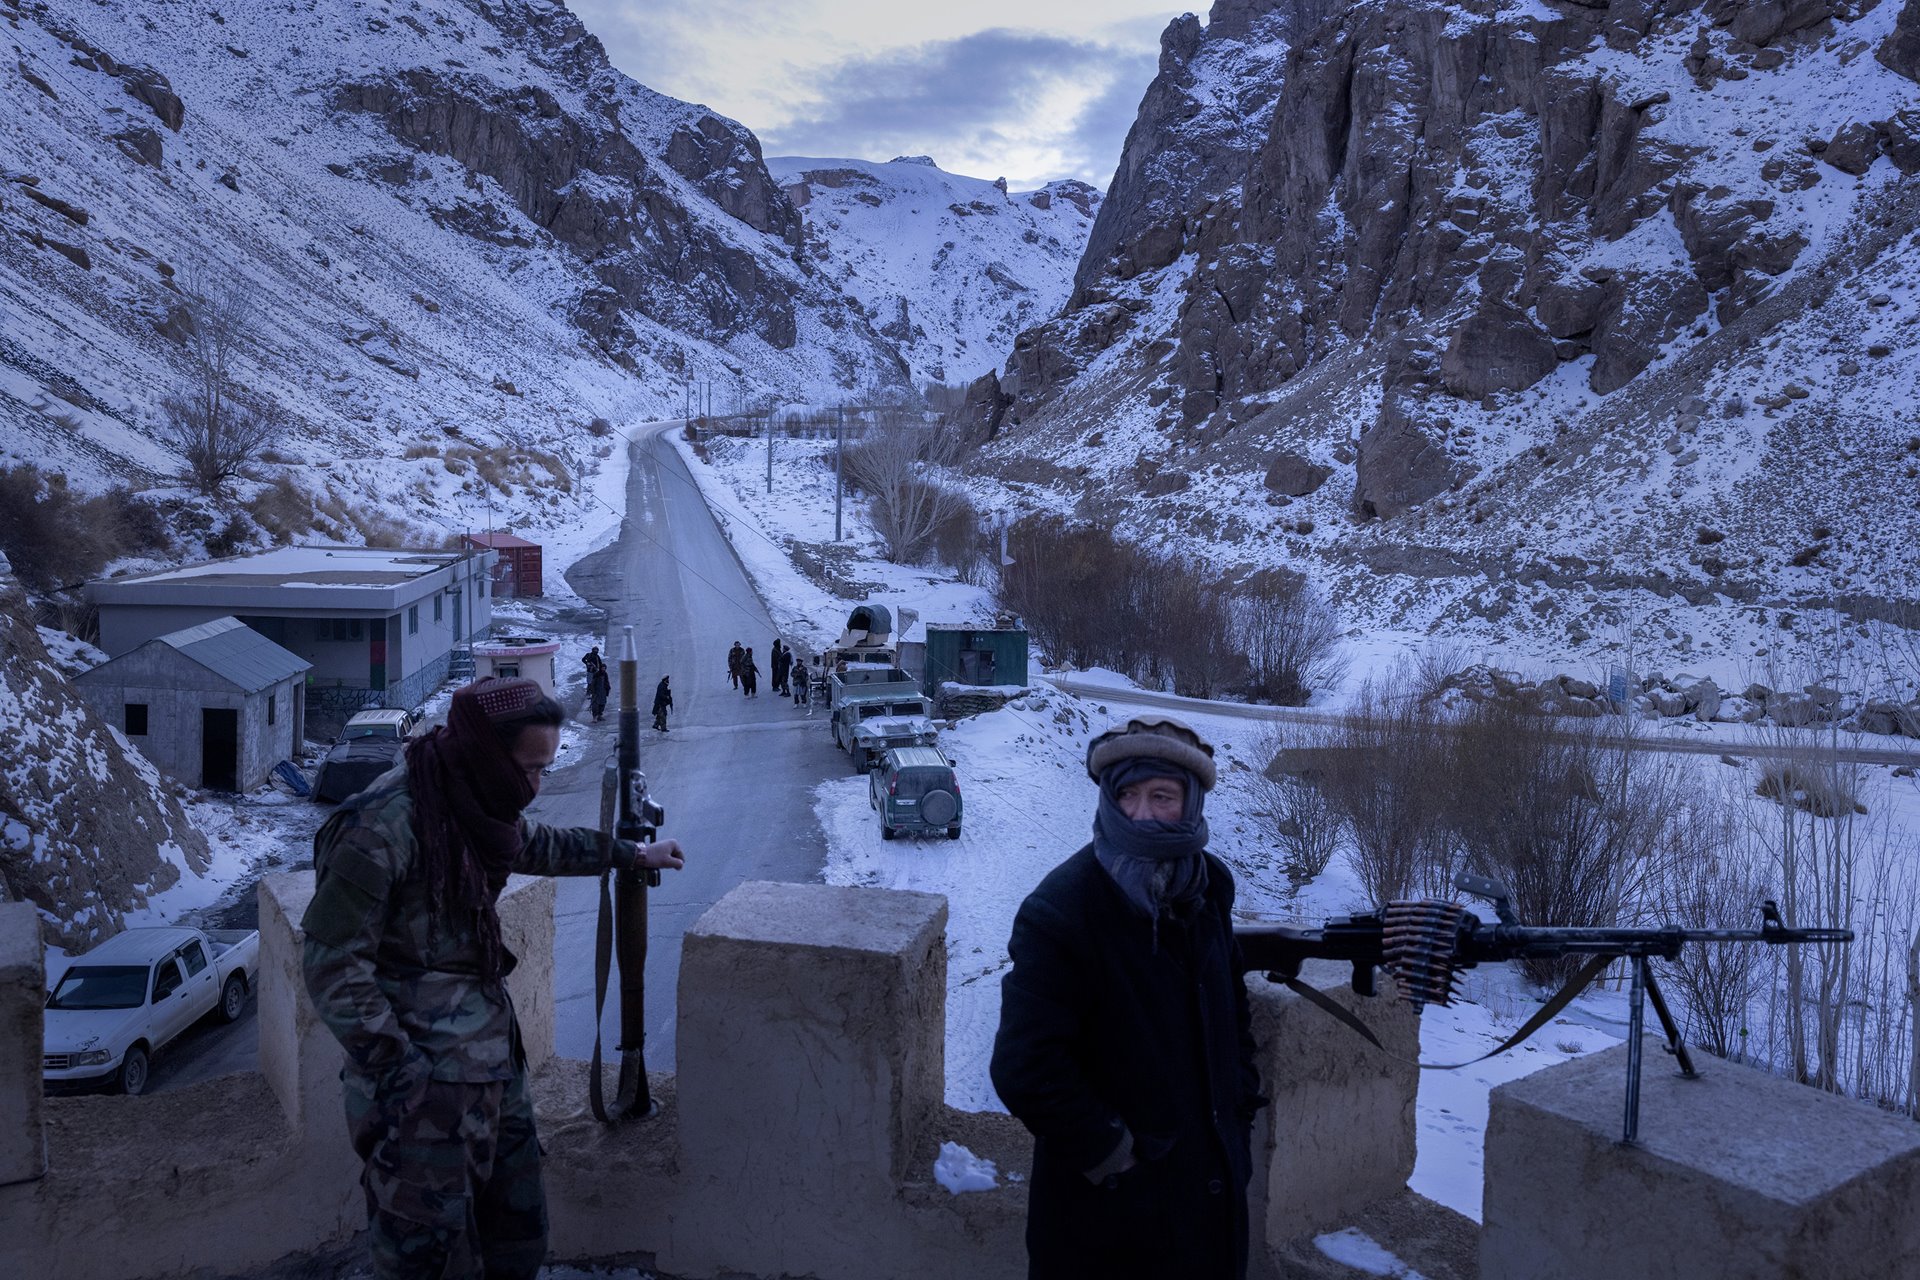 <p>A heavily armed Taliban checkpoint outside Bamiyan, Afghanistan. For years, the Taliban waged guerilla warfare against foreign troops and the Afghan army; now they must guard against attacks by the Islamic State, which is using the same tactics the Taliban deployed in an ongoing battle for control of the country.&nbsp;</p>
